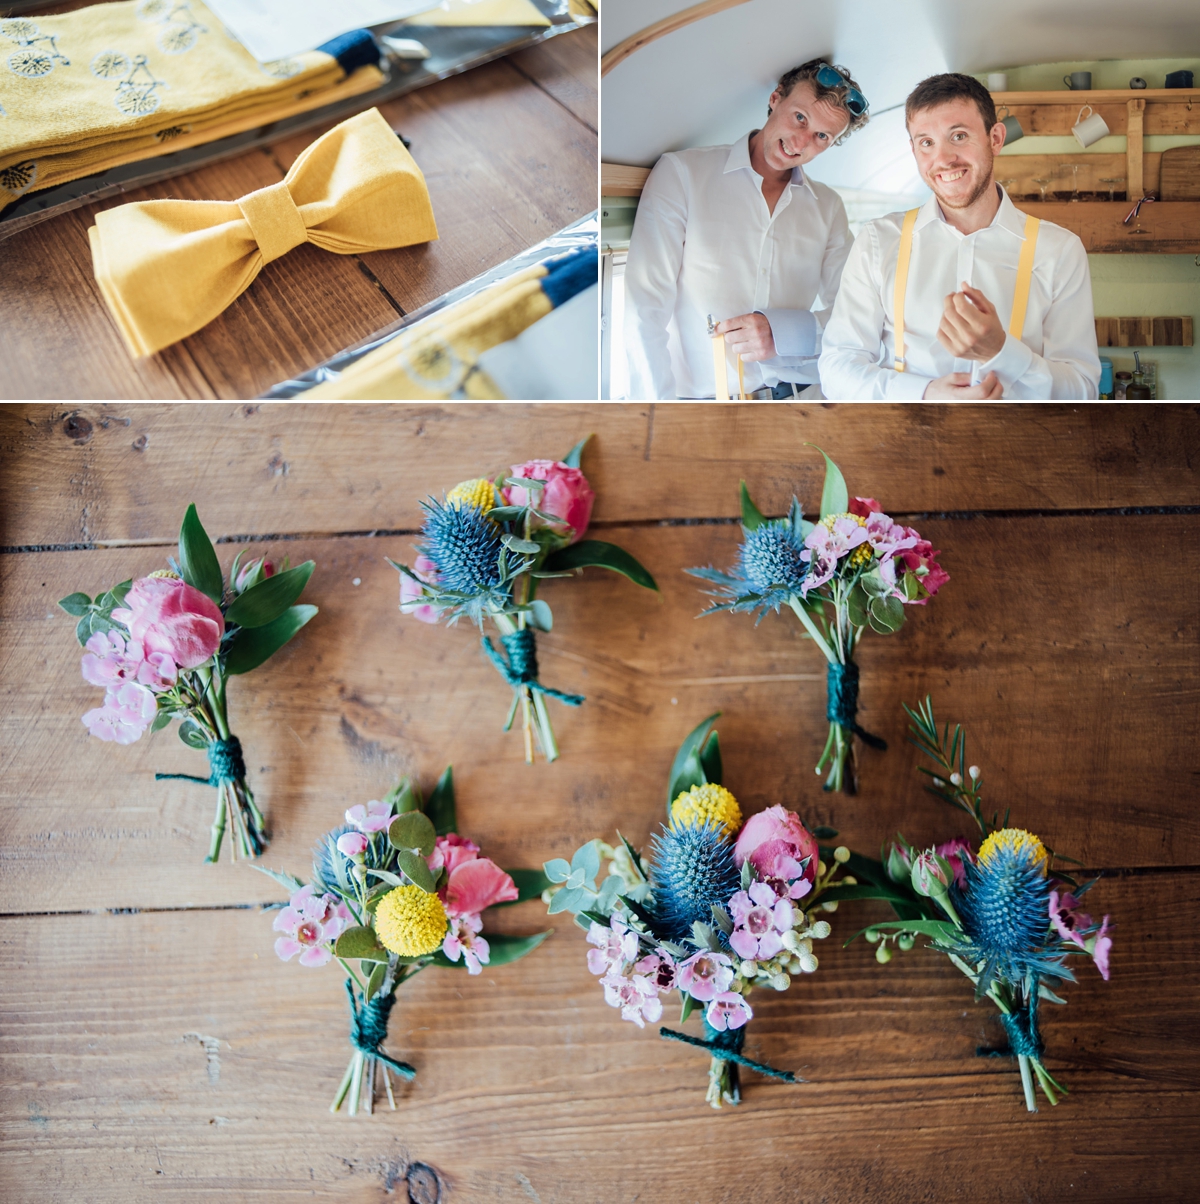 11 A handmade and natural outdoor wedding in Devon